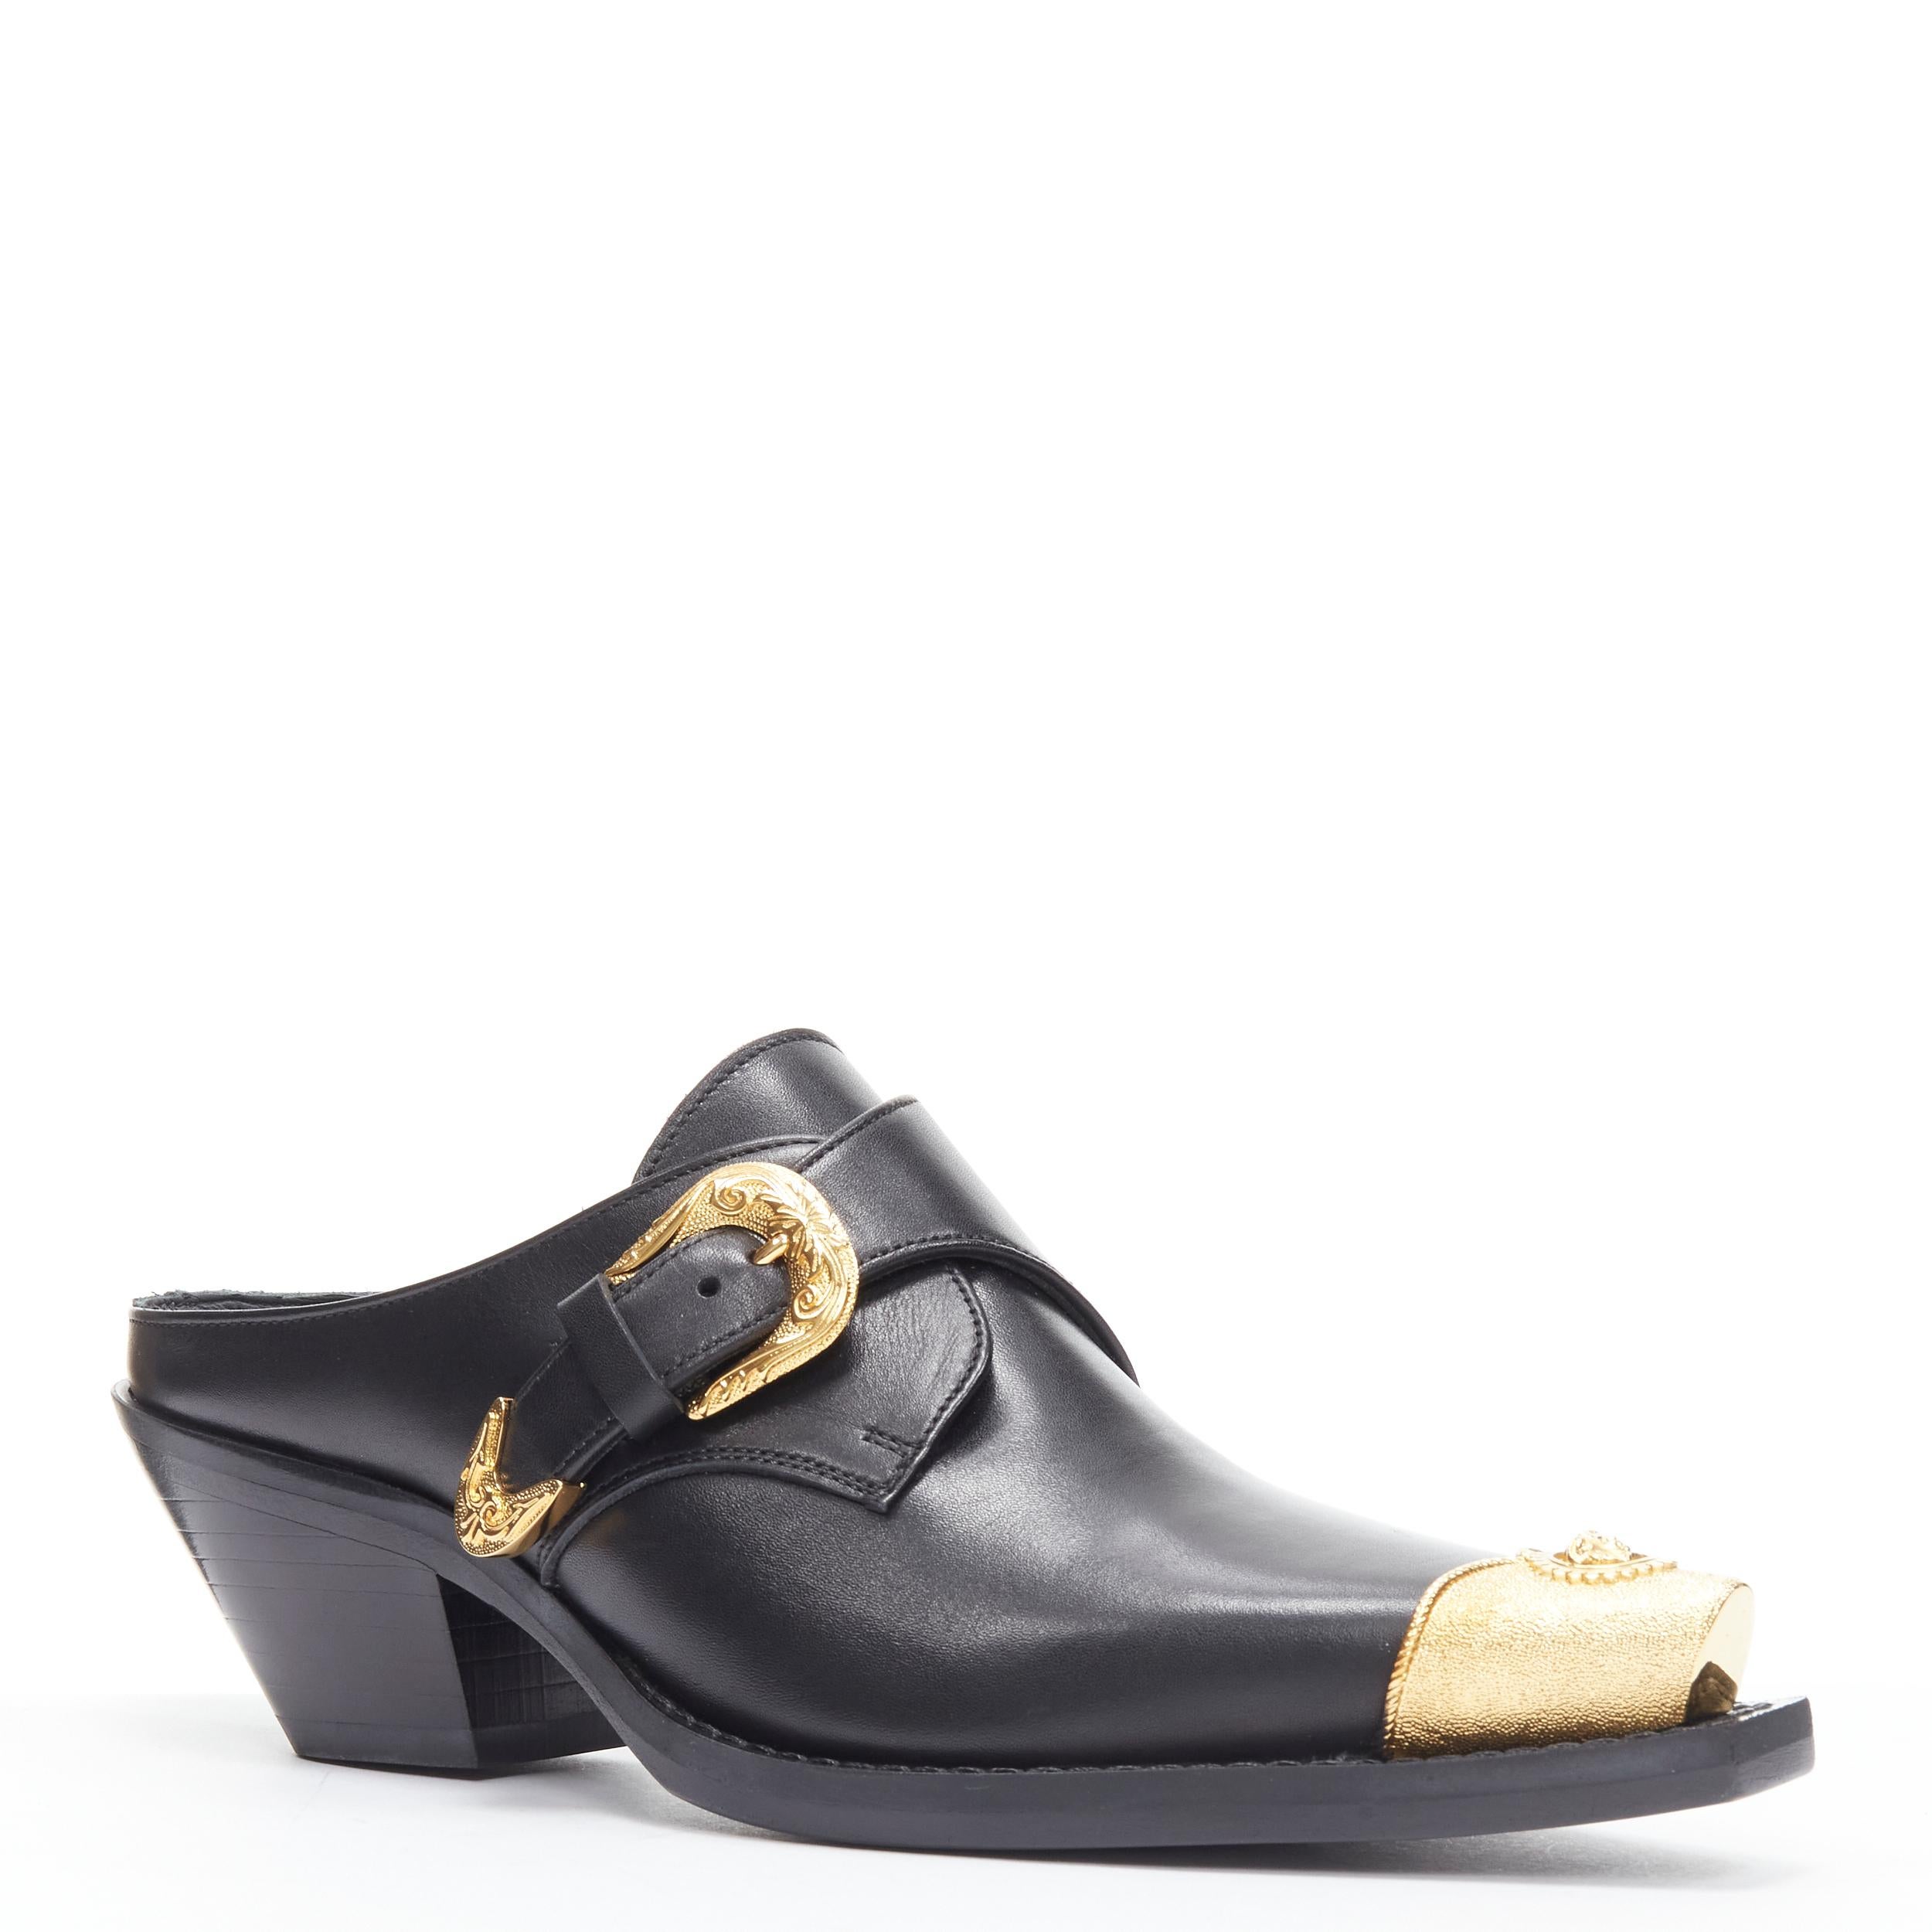 new VERSACE 2019 black leather gold Medusa toe western buckle cuban mule EU36 
Reference: TGAS/B01894 
Brand: Versace 
Designer: Donatella Versace 
Model: Metal toe mule 
Collection: 2019 Fall Winter Runway 
Material: Leather 
Color: Black 
Pattern: